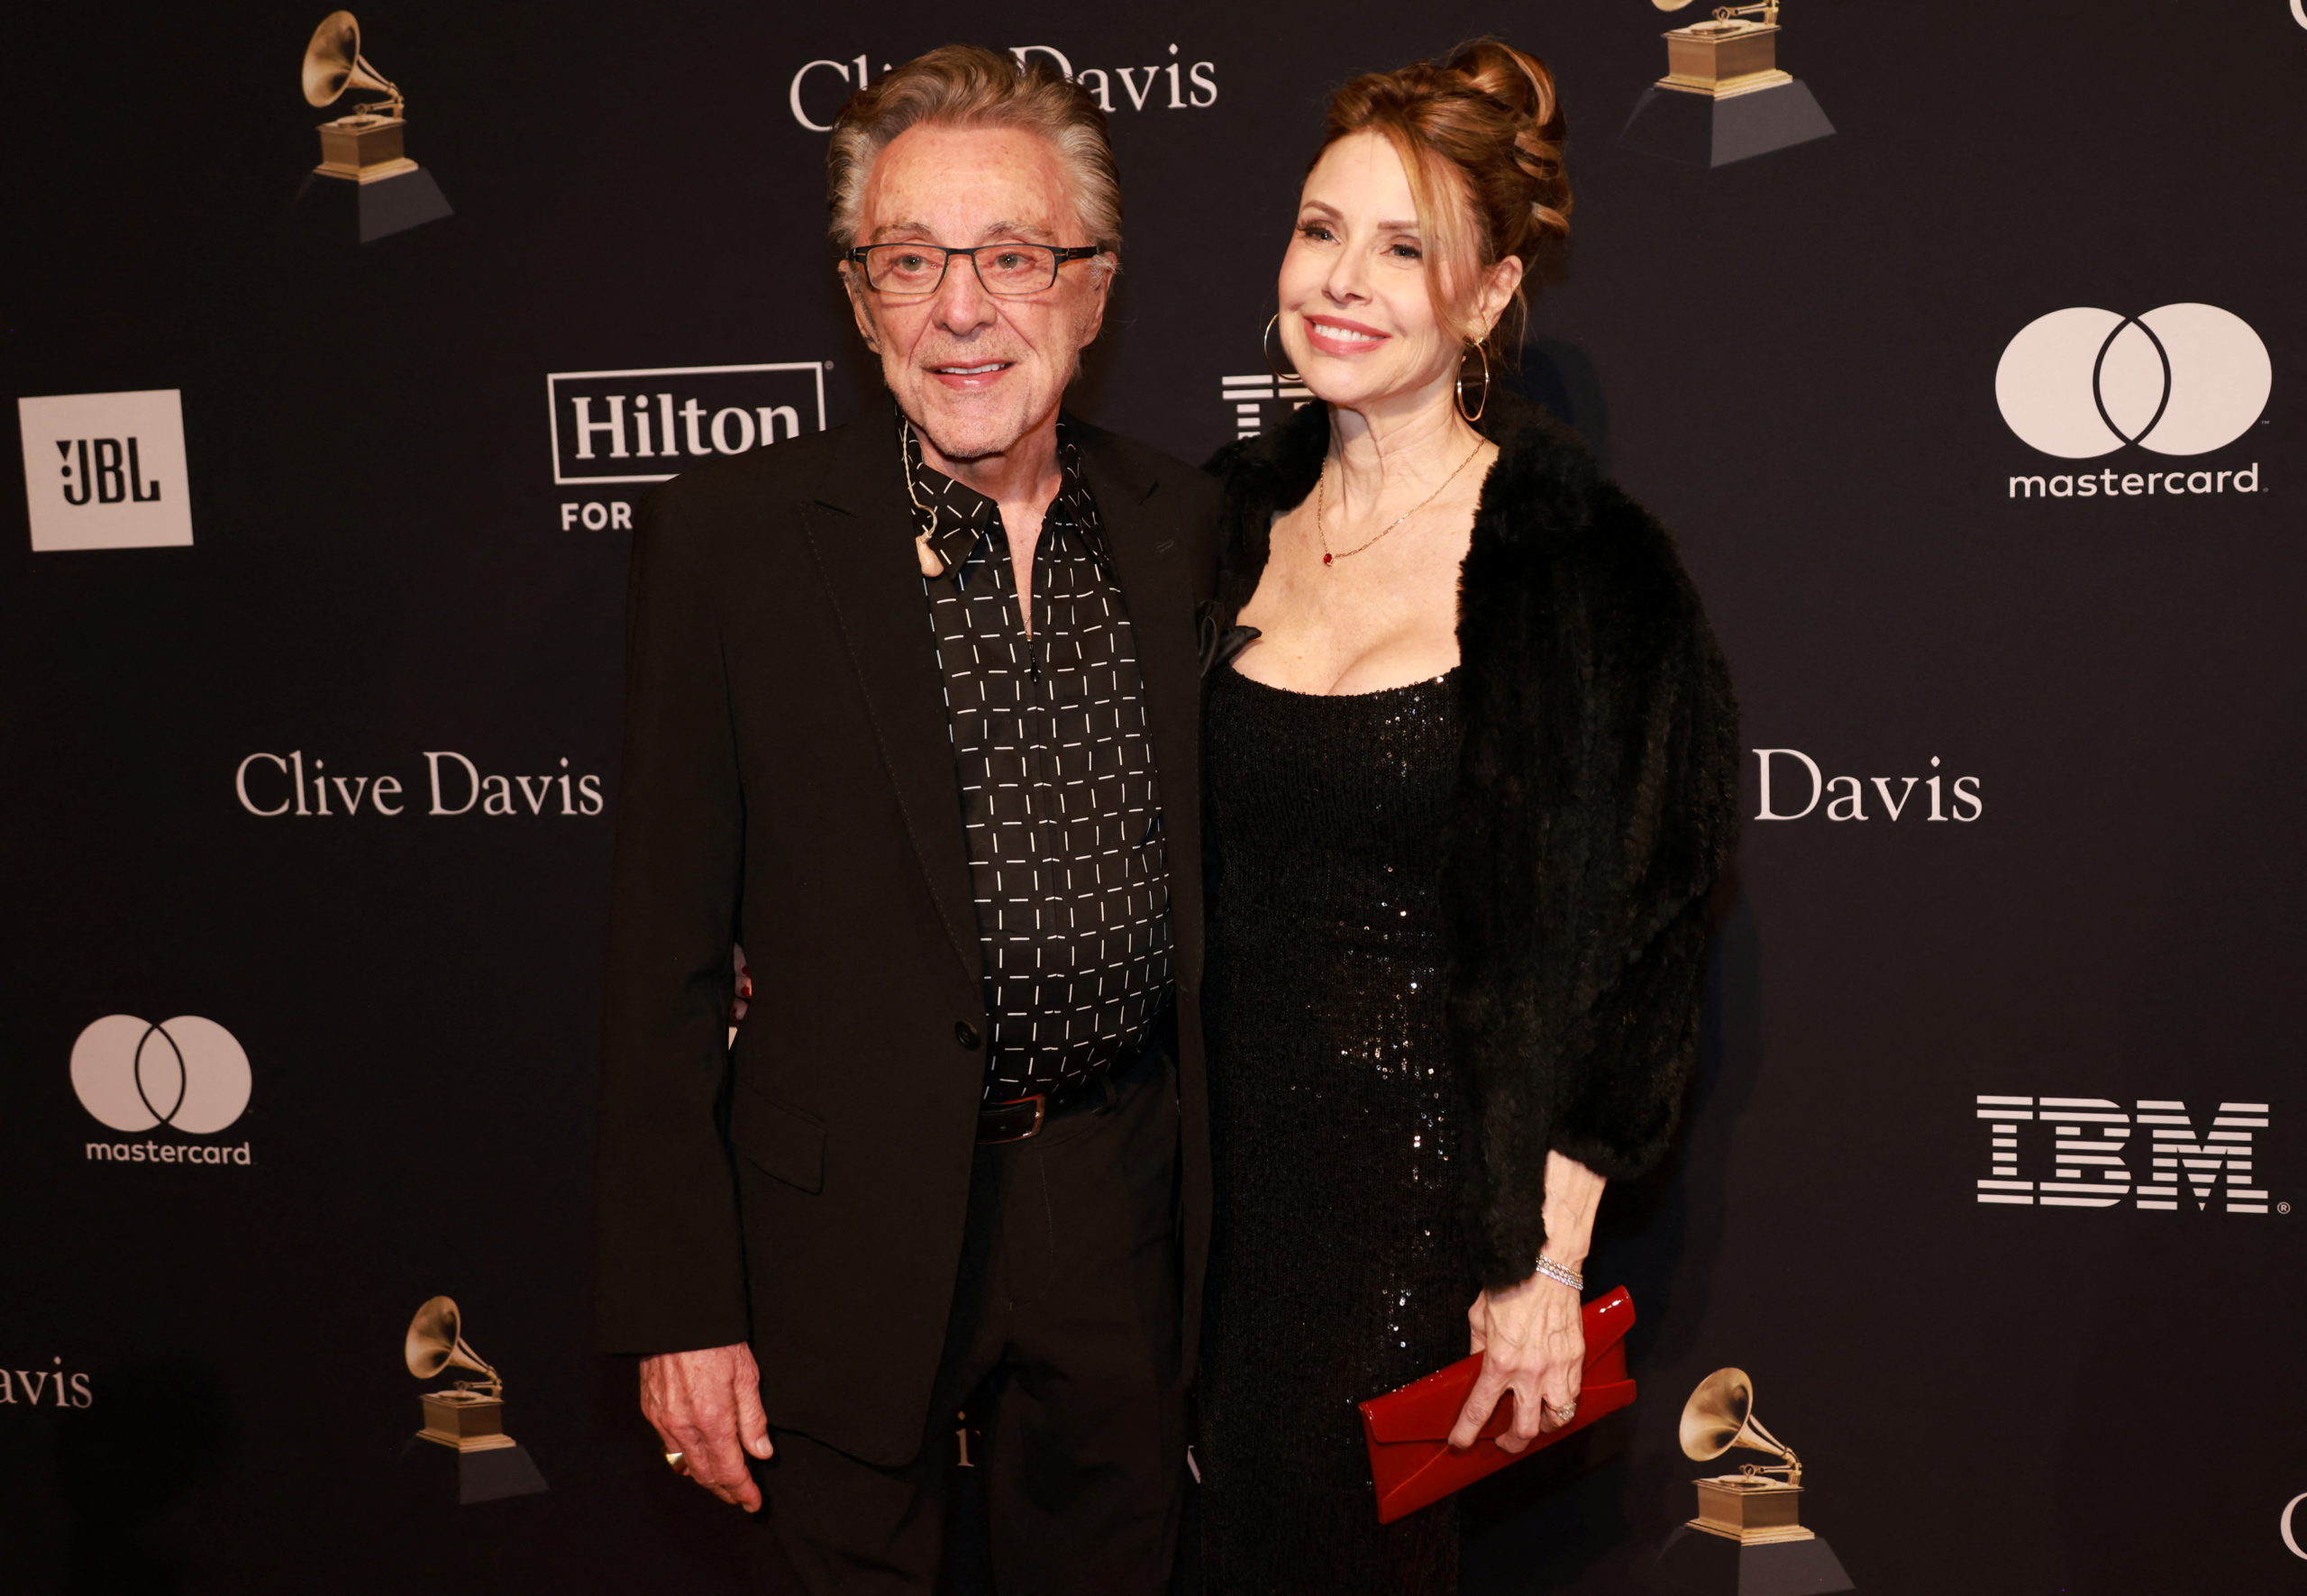 Singer Frankie Valli and his spouse Jackie Jacobs attend the Pre-Grammy Gala in Beverly Hills, Los Angeles, California, U.S. February 4, 2023 REUTERS/Aude Guerrucci